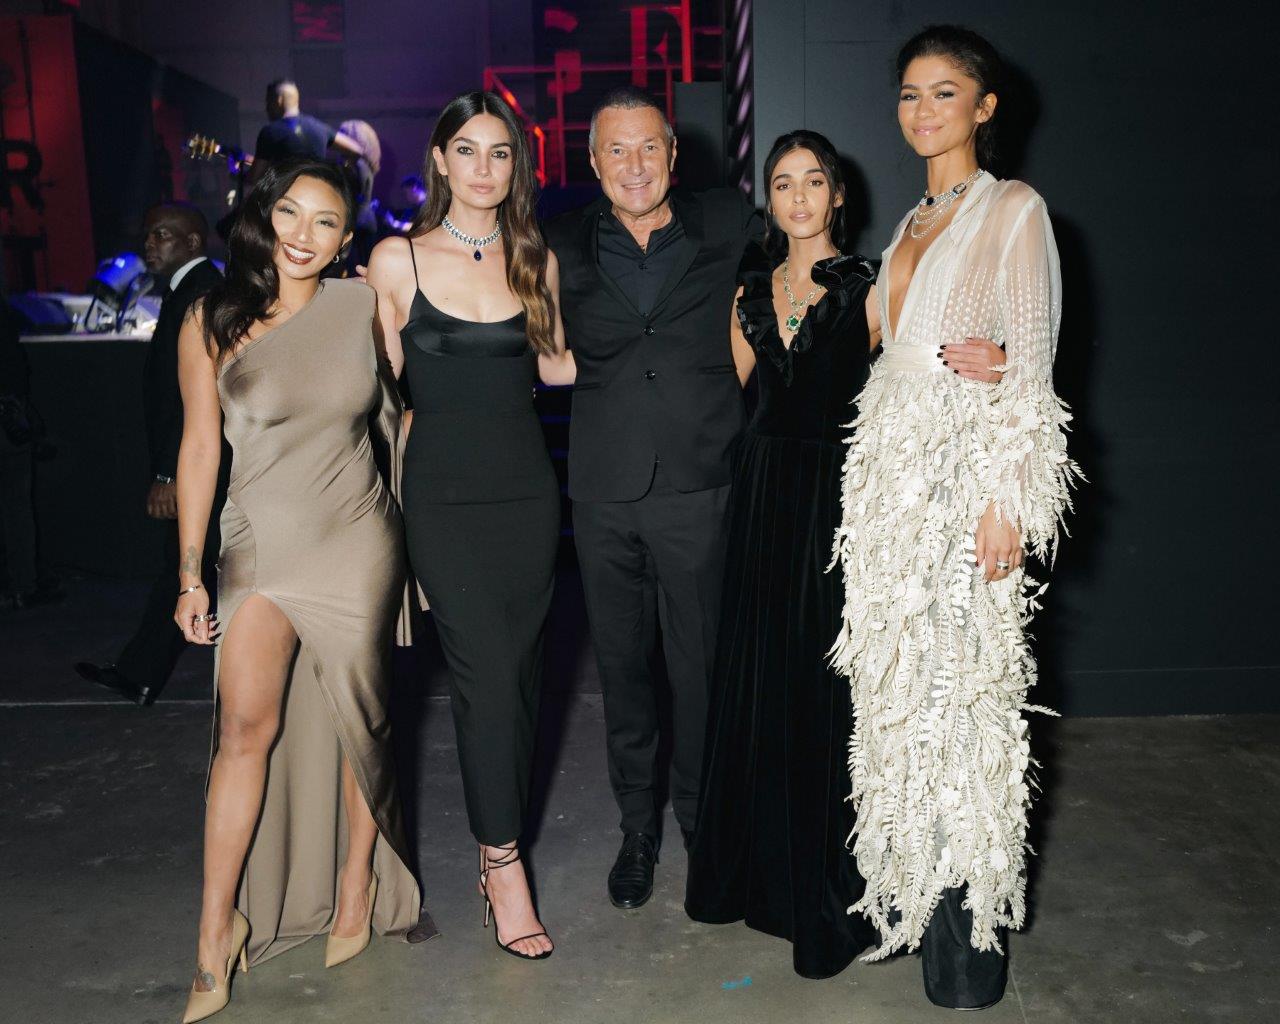 Bulgari lights up New York with its  Rock campaign launch